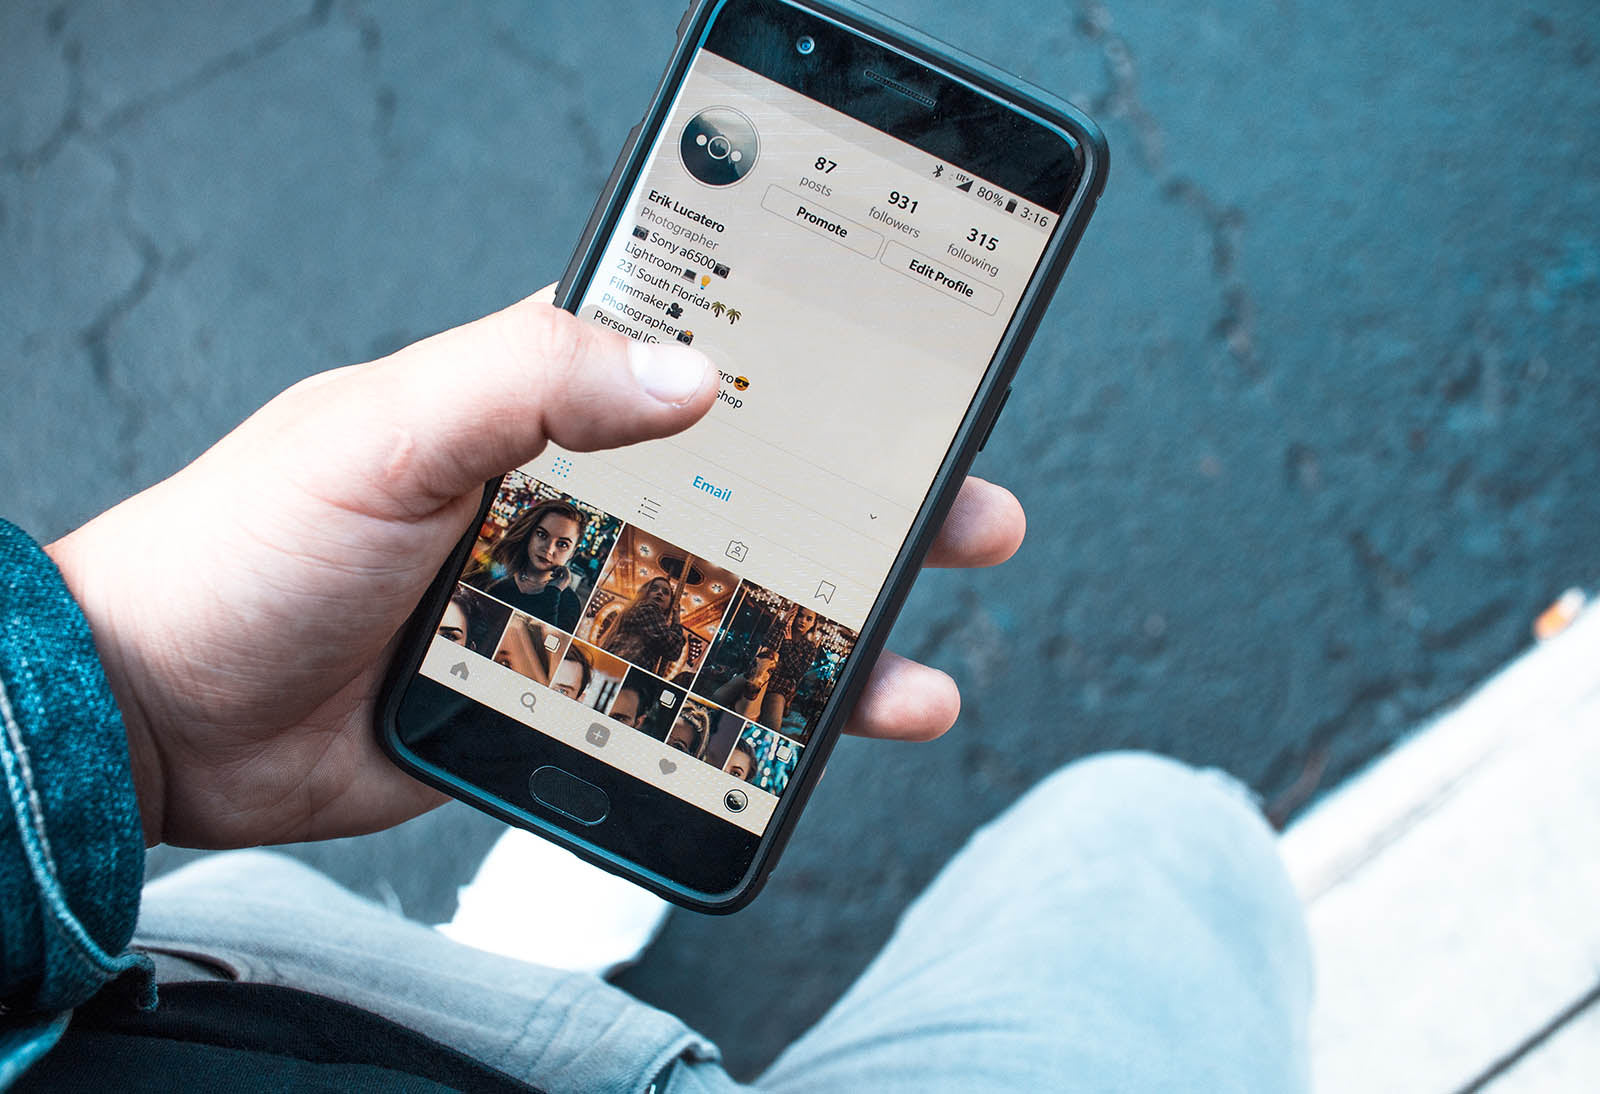 Should You Buy Real Instagram Followers? Breaking Down the Options